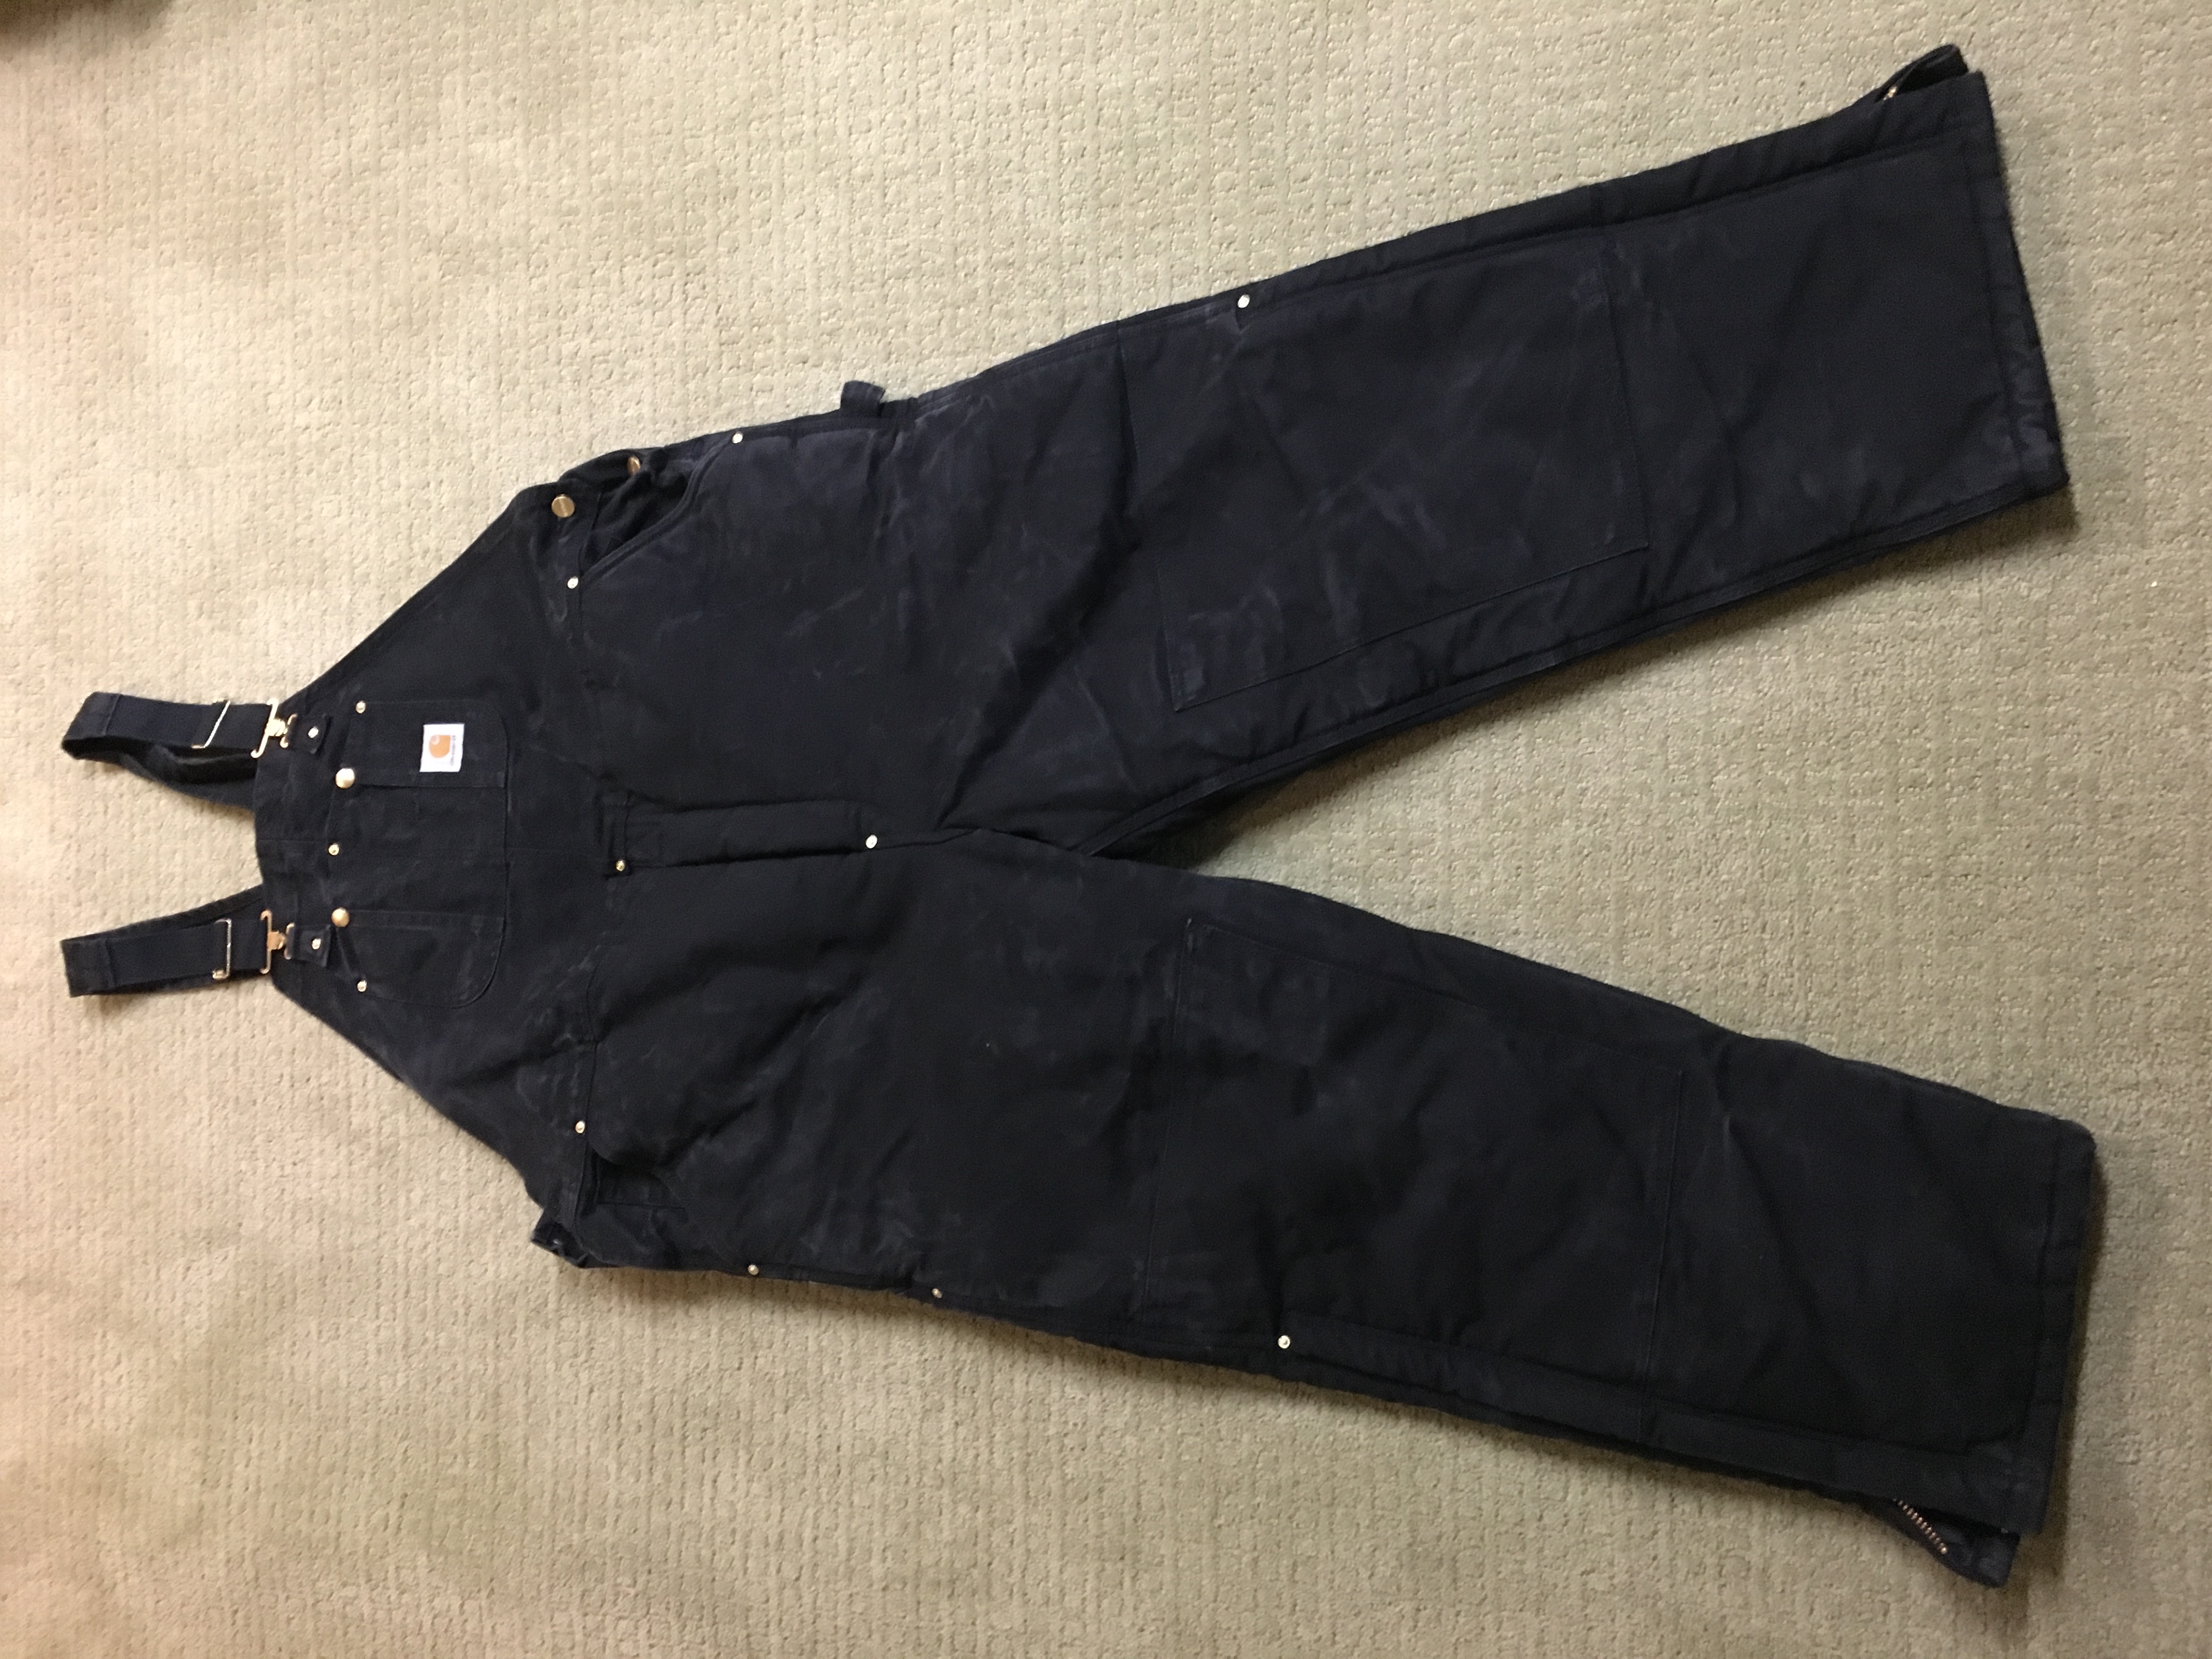 Carhart lined winter jacket and bib overalls - Classified Ads | In ...